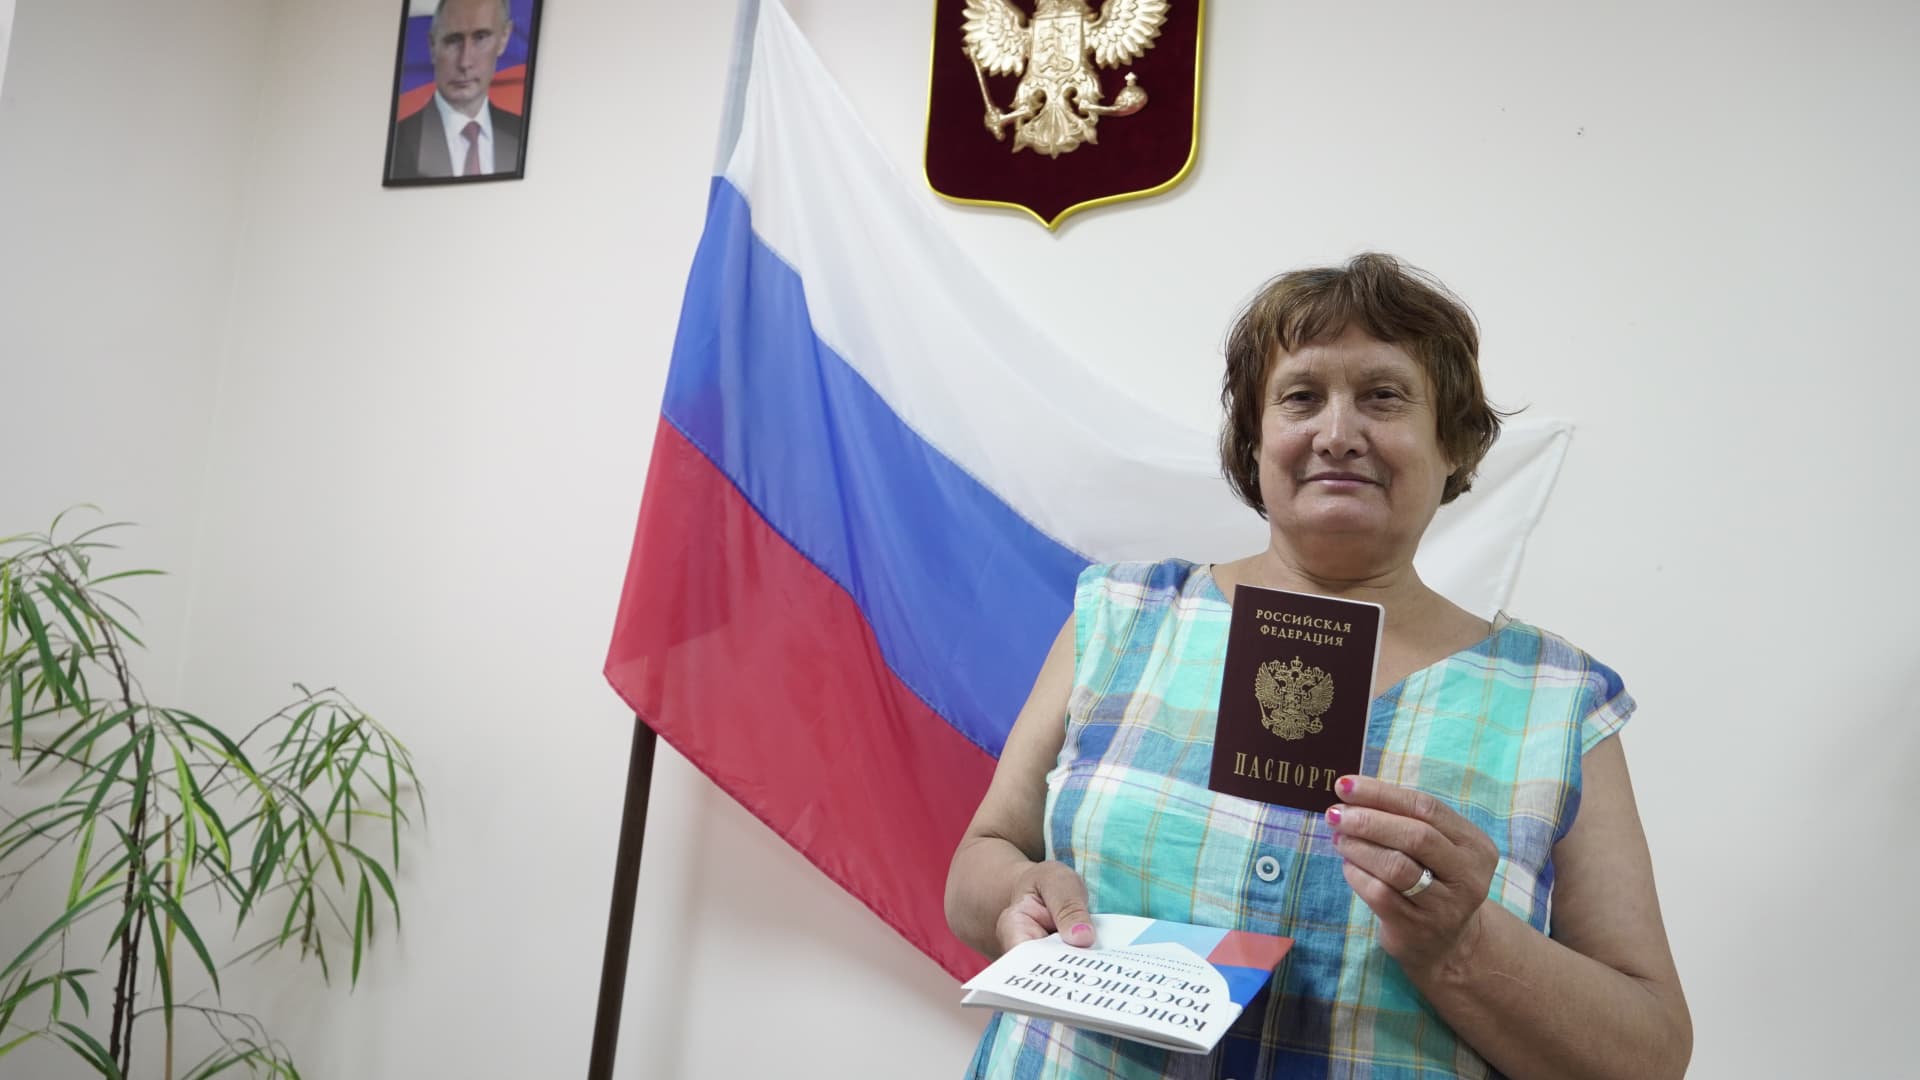 People arrive to receive Russian passports at a centre in Kherson after Russian President Vladimir Putin signed decree to make it easier for residents of Kherson and Melitopol regions to get passports, in Kherson, Kherson Oblast, Ukraine on July 21, 2022. 